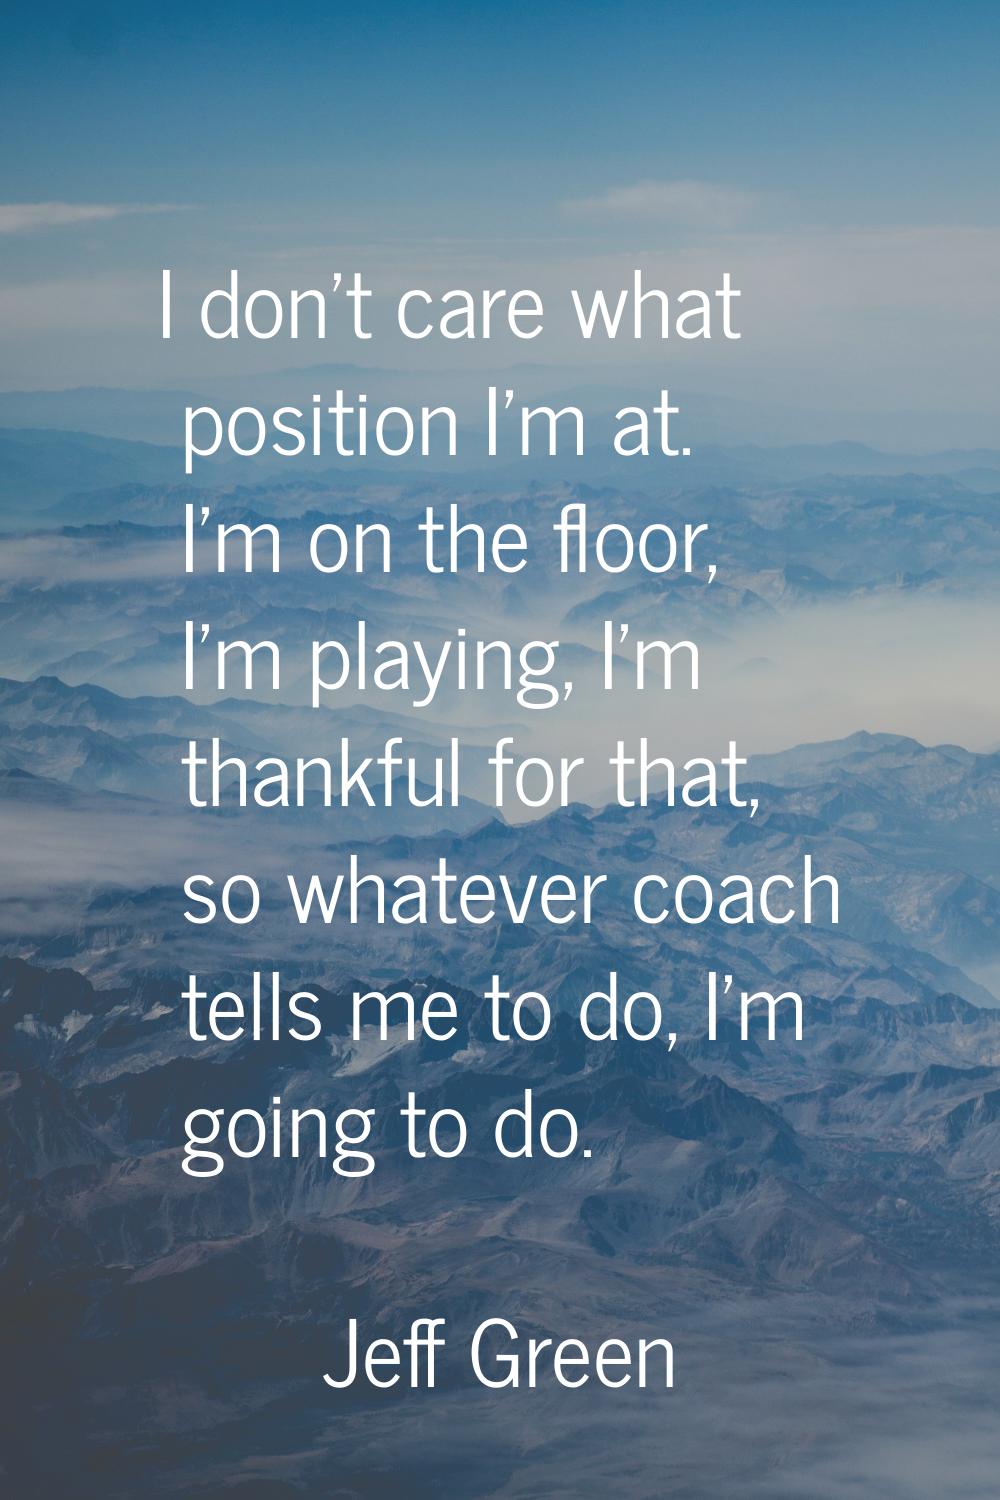 I don't care what position I'm at. I'm on the floor, I'm playing, I'm thankful for that, so whateve